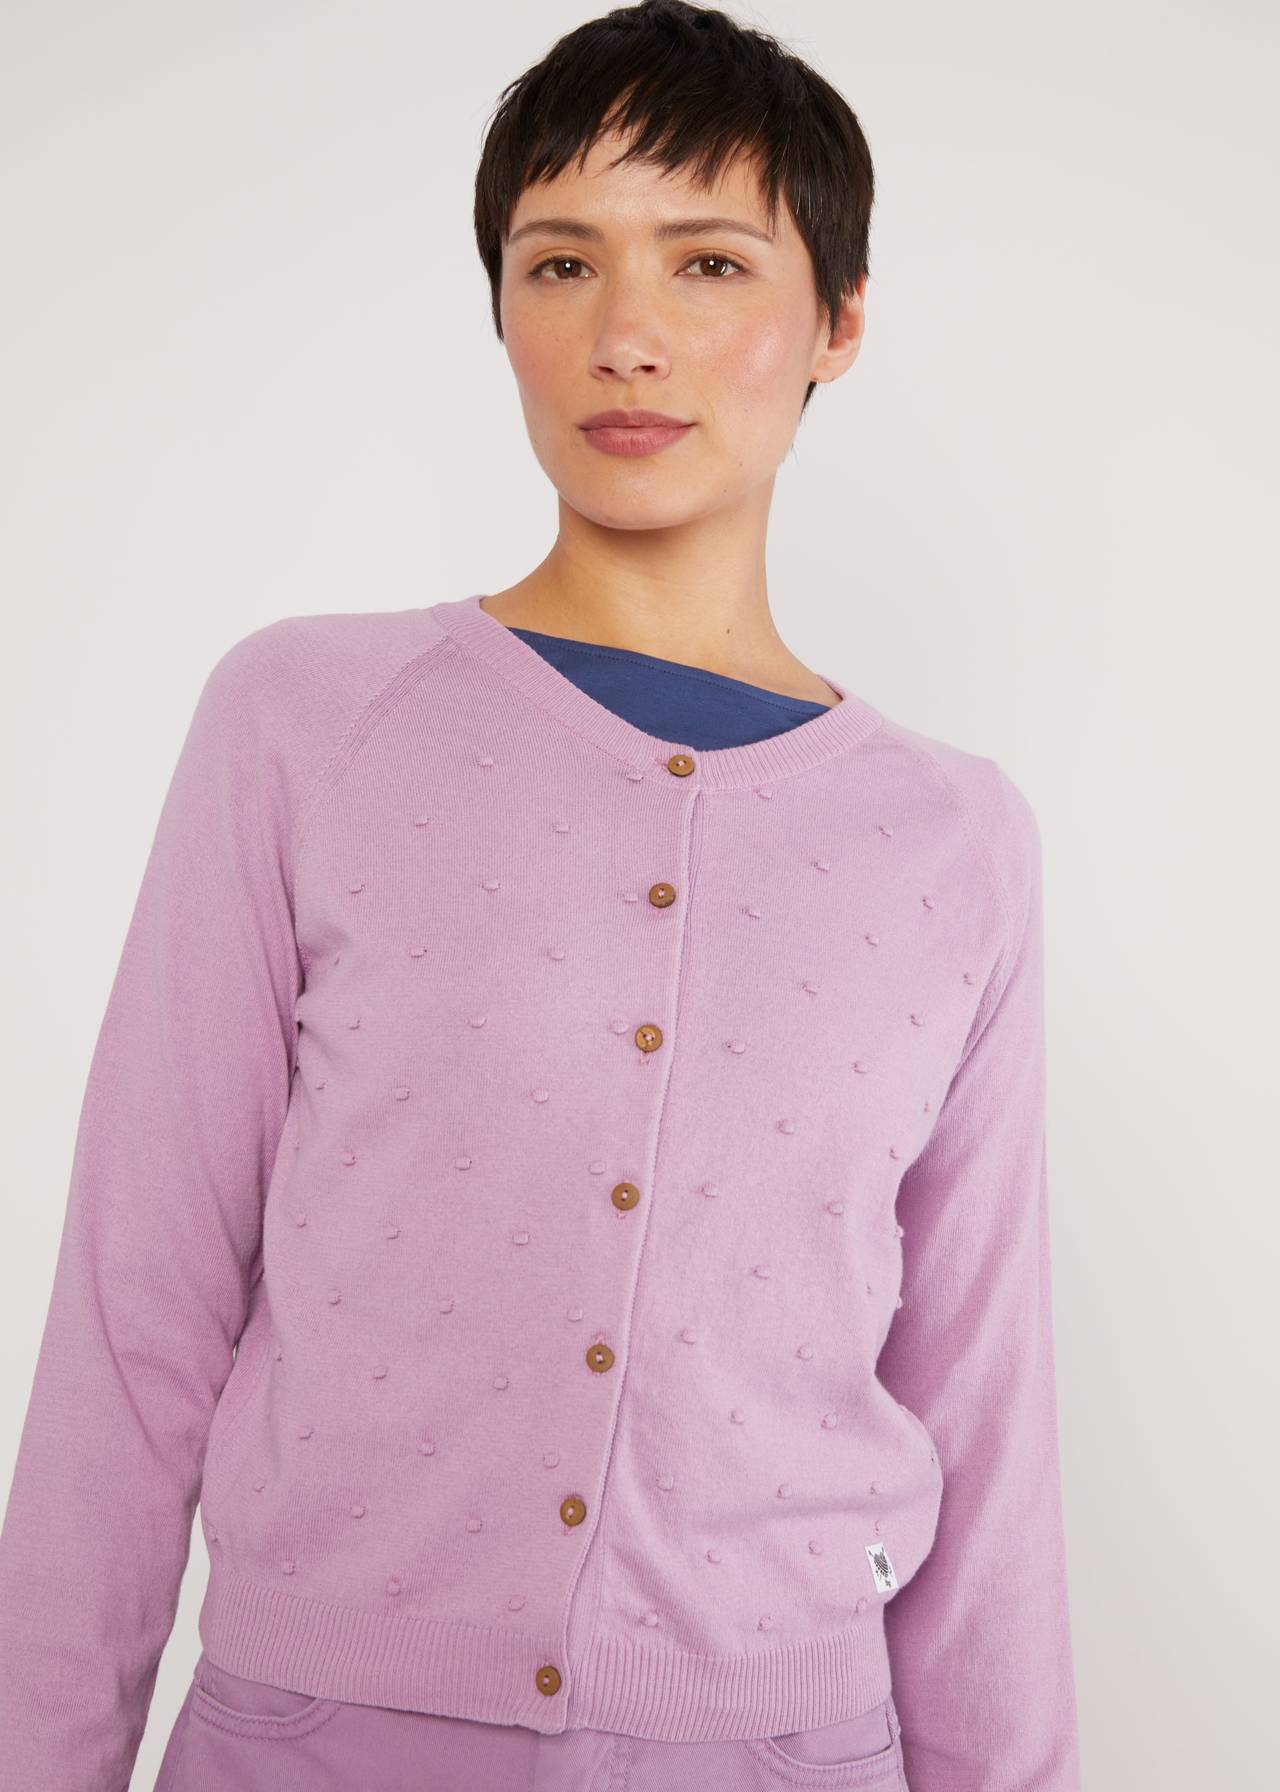 Blutsgeschwister Cardigan Knot Hop, Farbe: funny bugs lilac knit